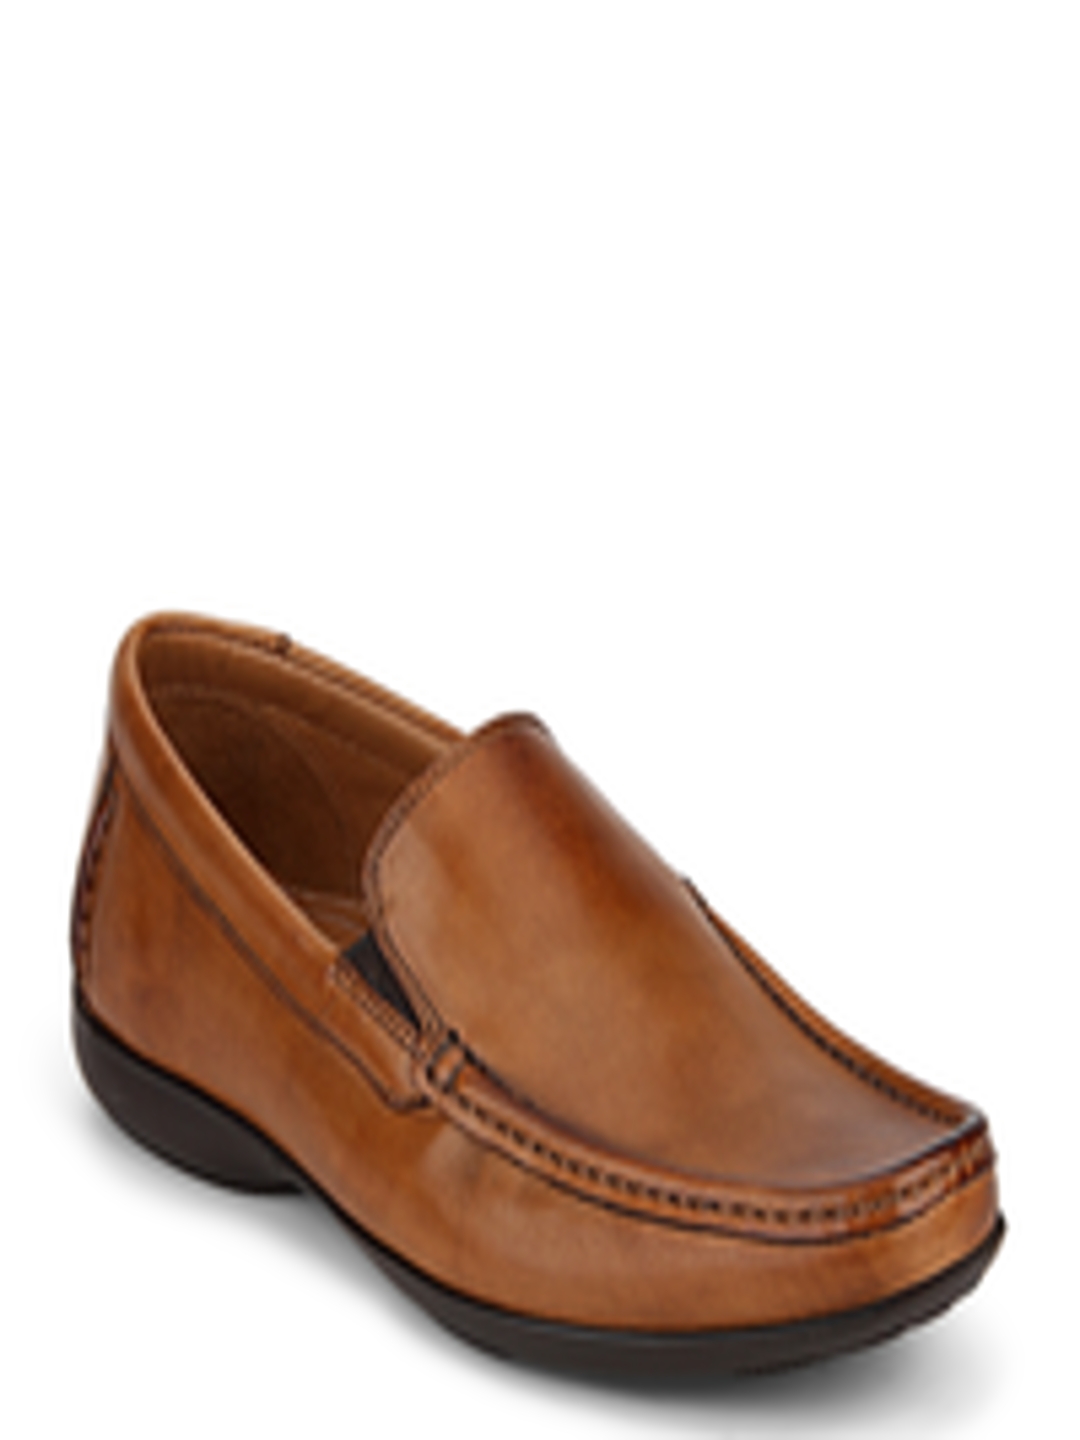 Buy Finer Sun Tan Moccasins - Casual Shoes for Men 7180926 | Myntra